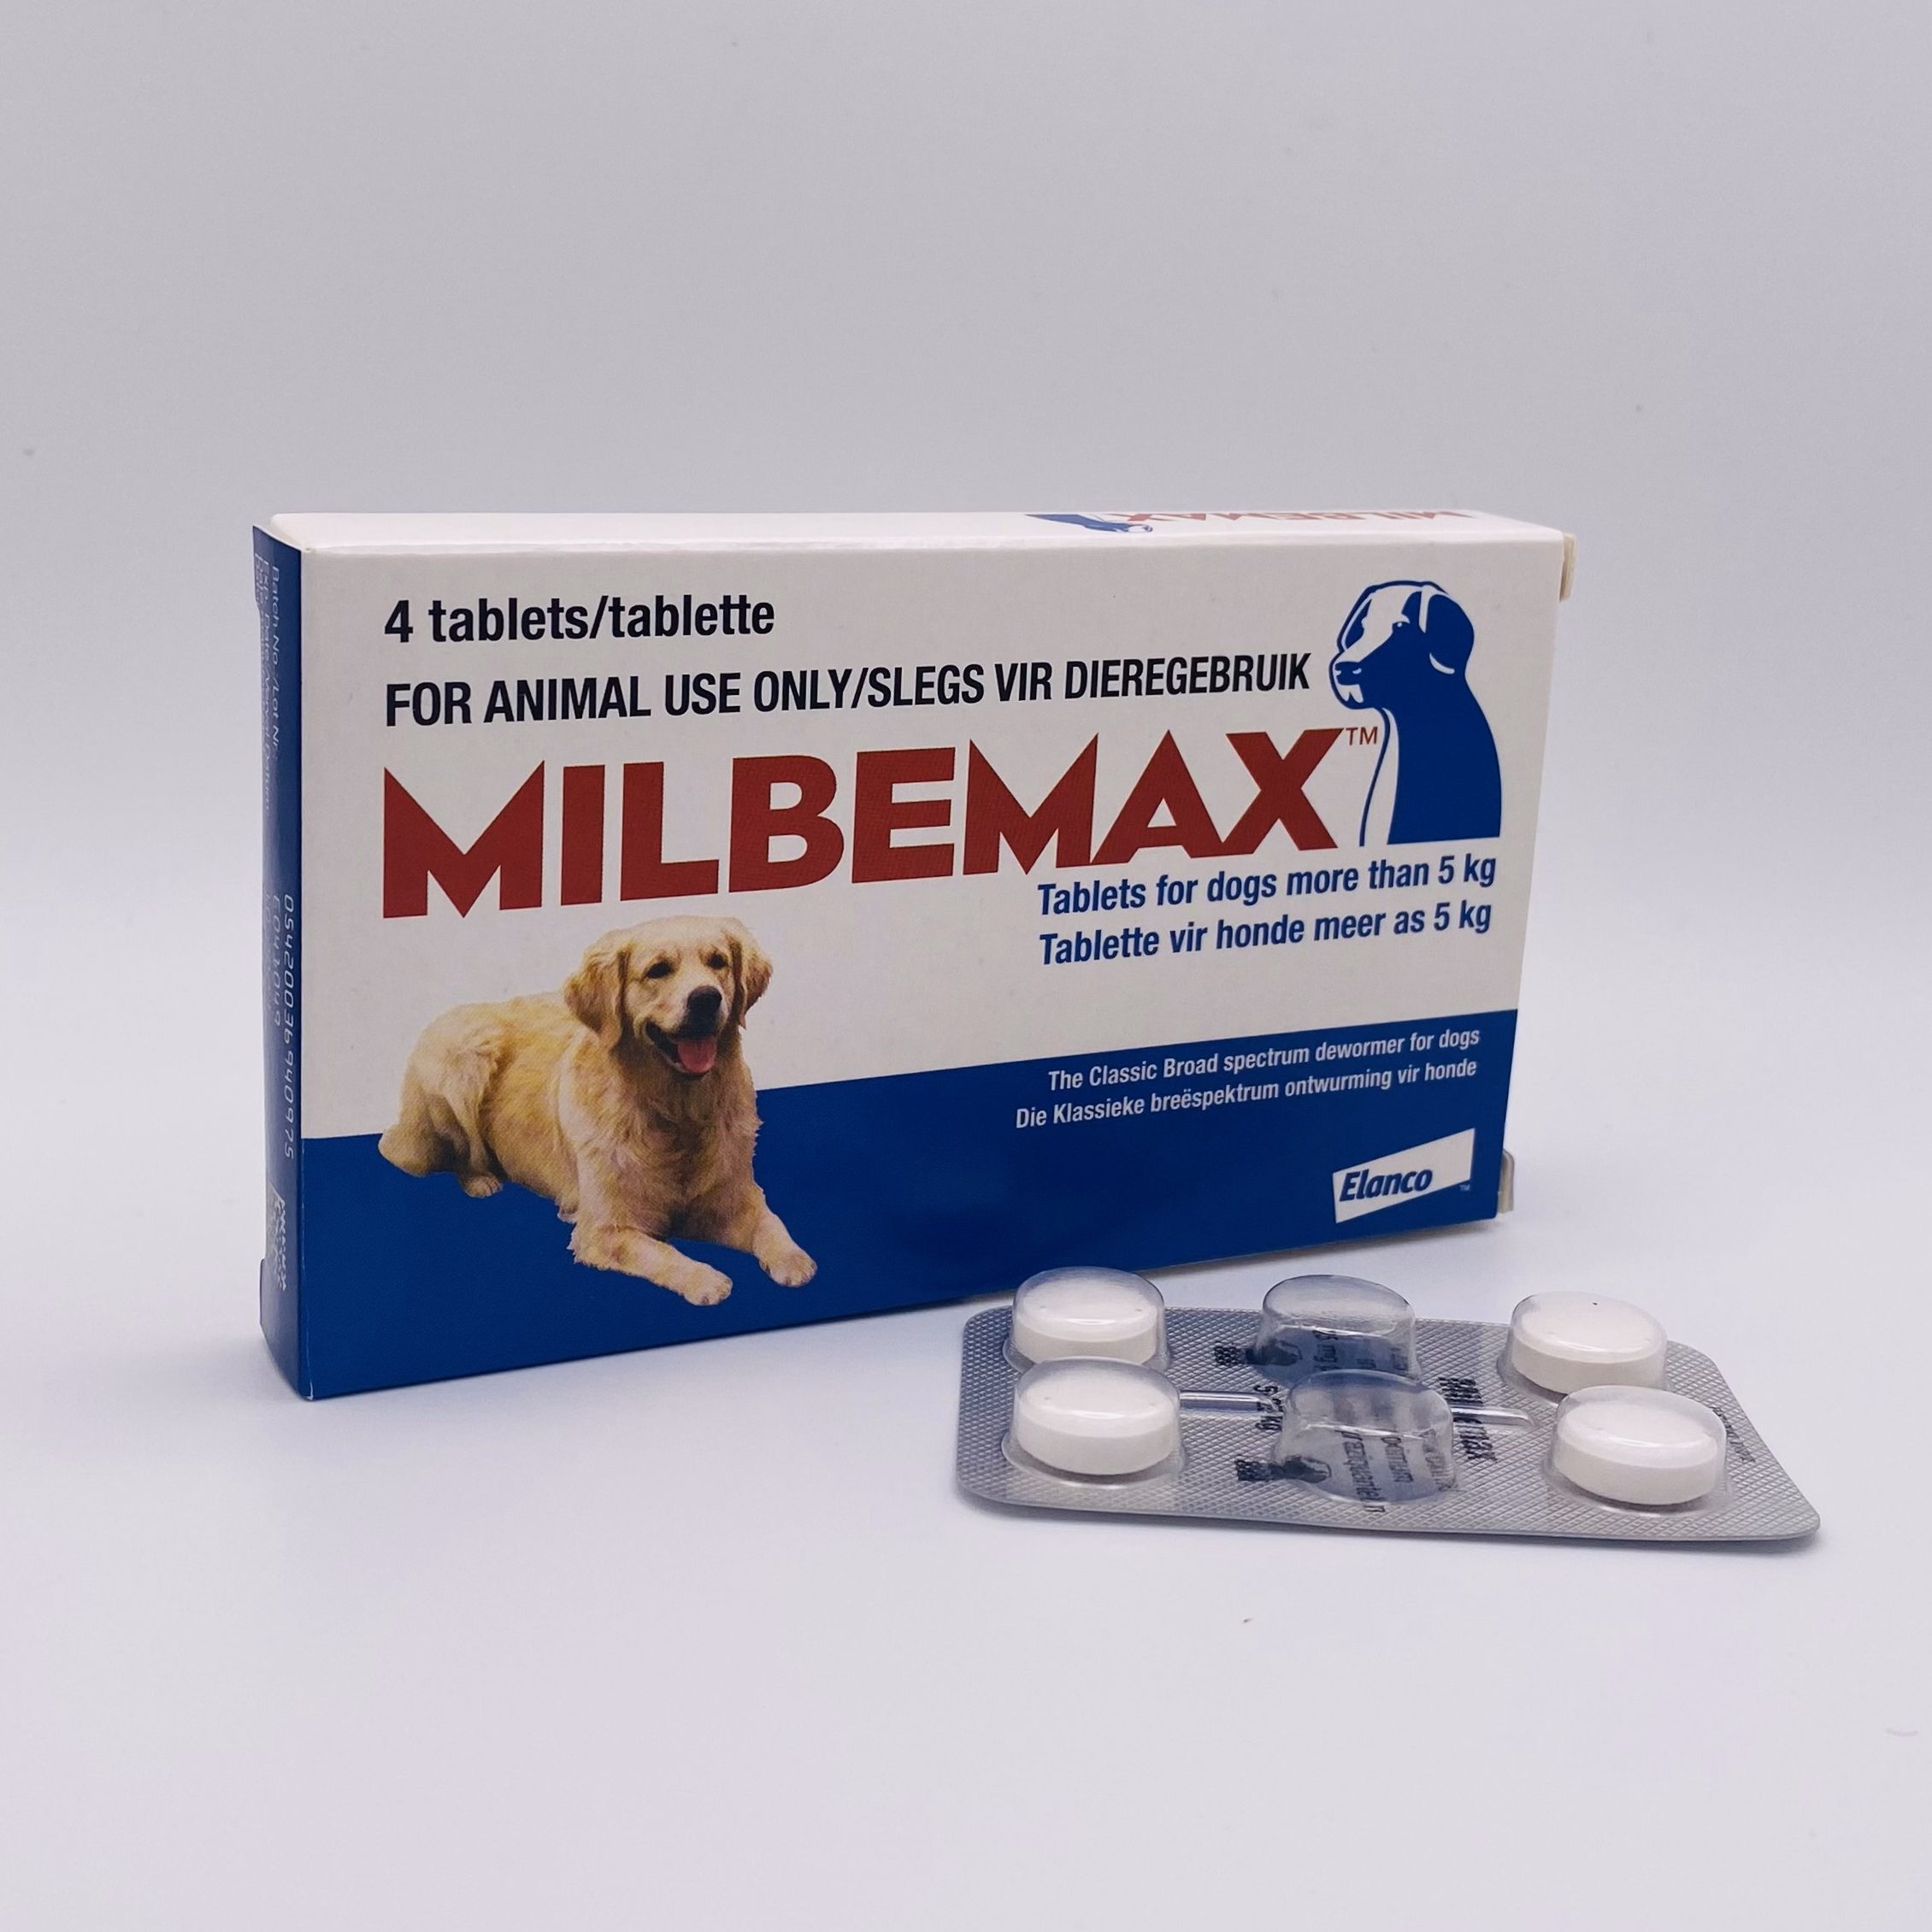 Milbemax Tablets for dogs more than 5kg (4 tablets)